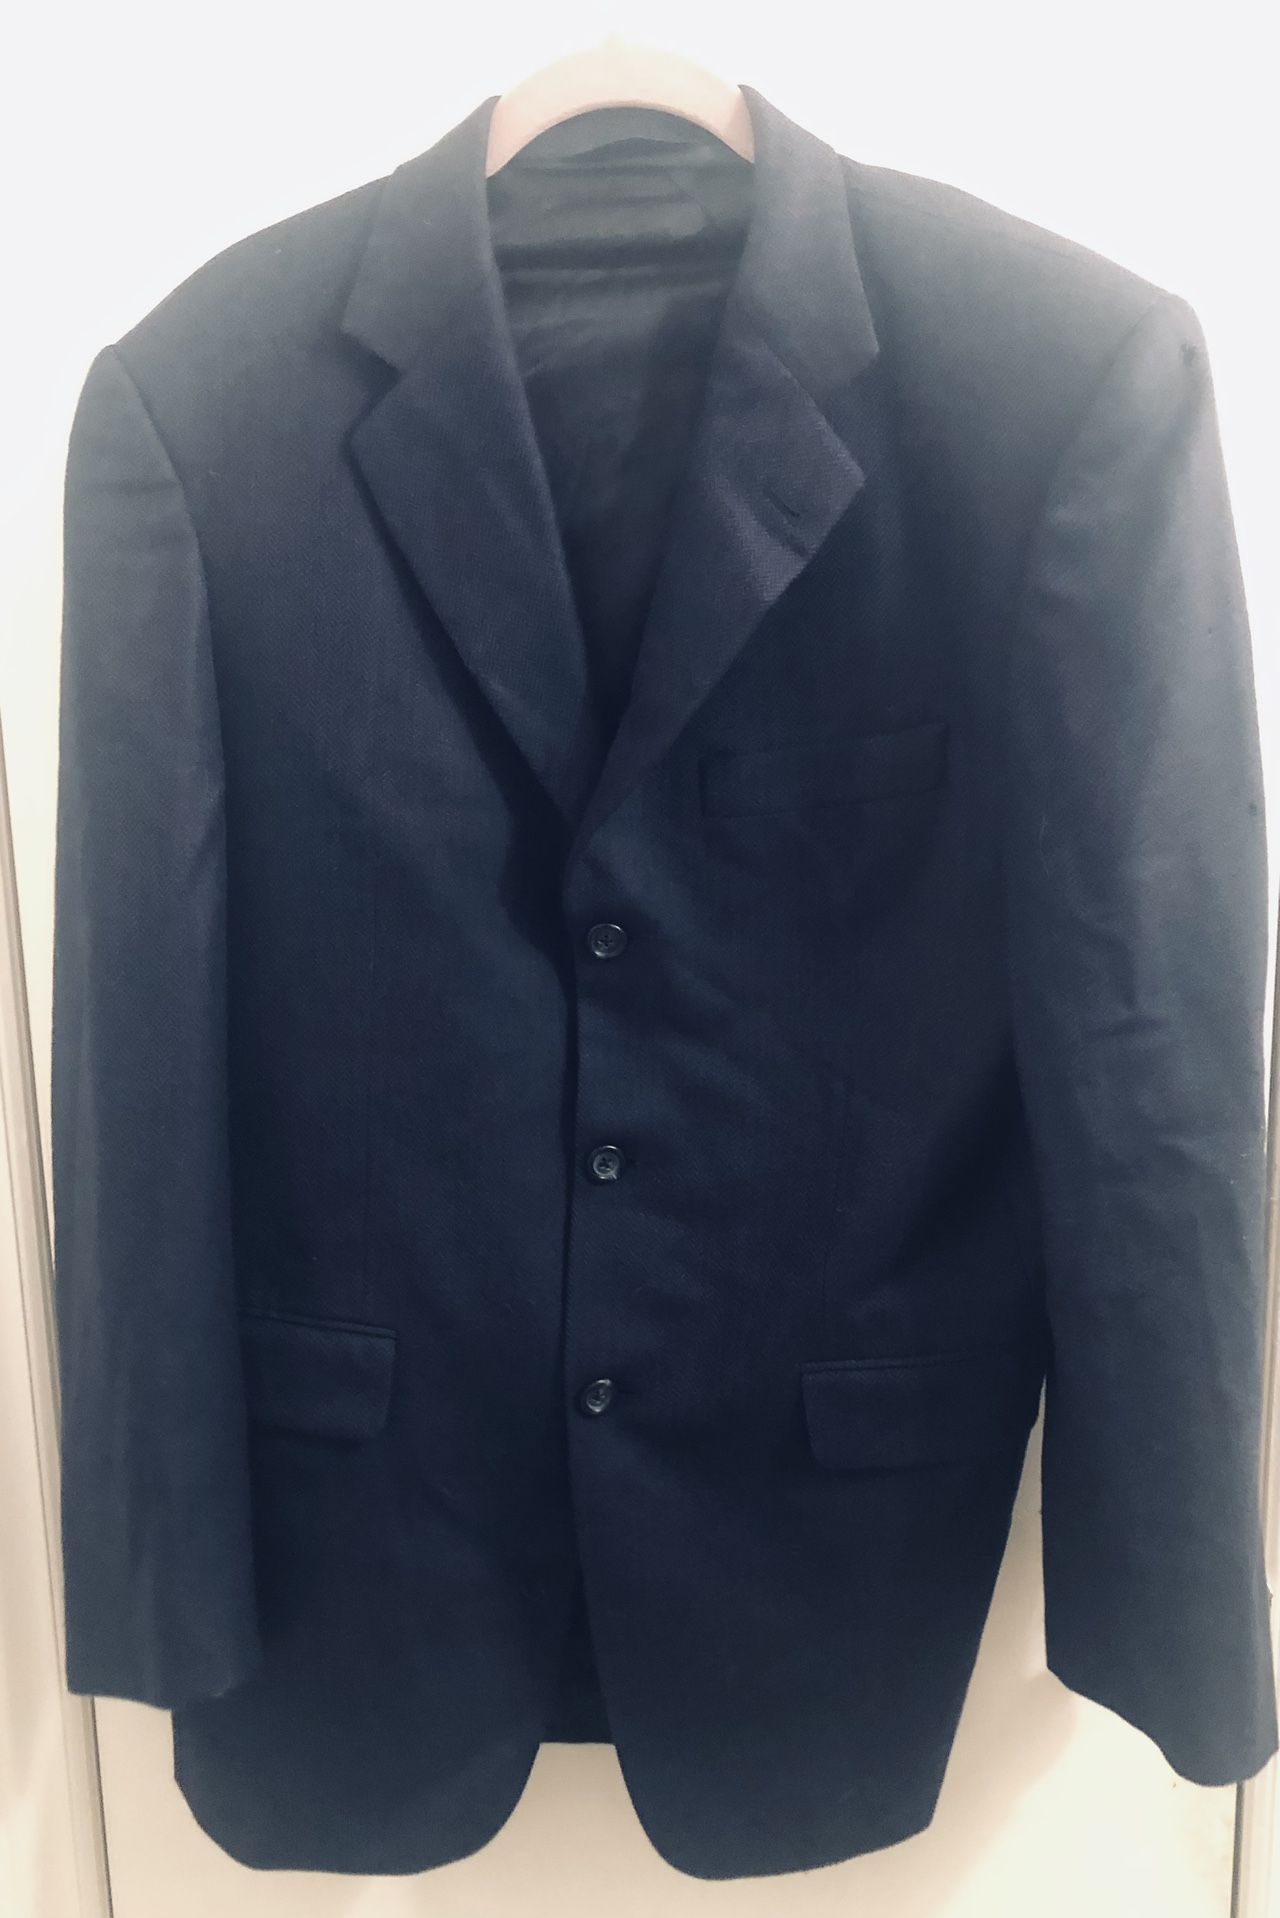 Vintage Burberry Navy Blue Sport Coat Jacket 100% Wool 38R Made In London. Last pic shows wear on lapel  